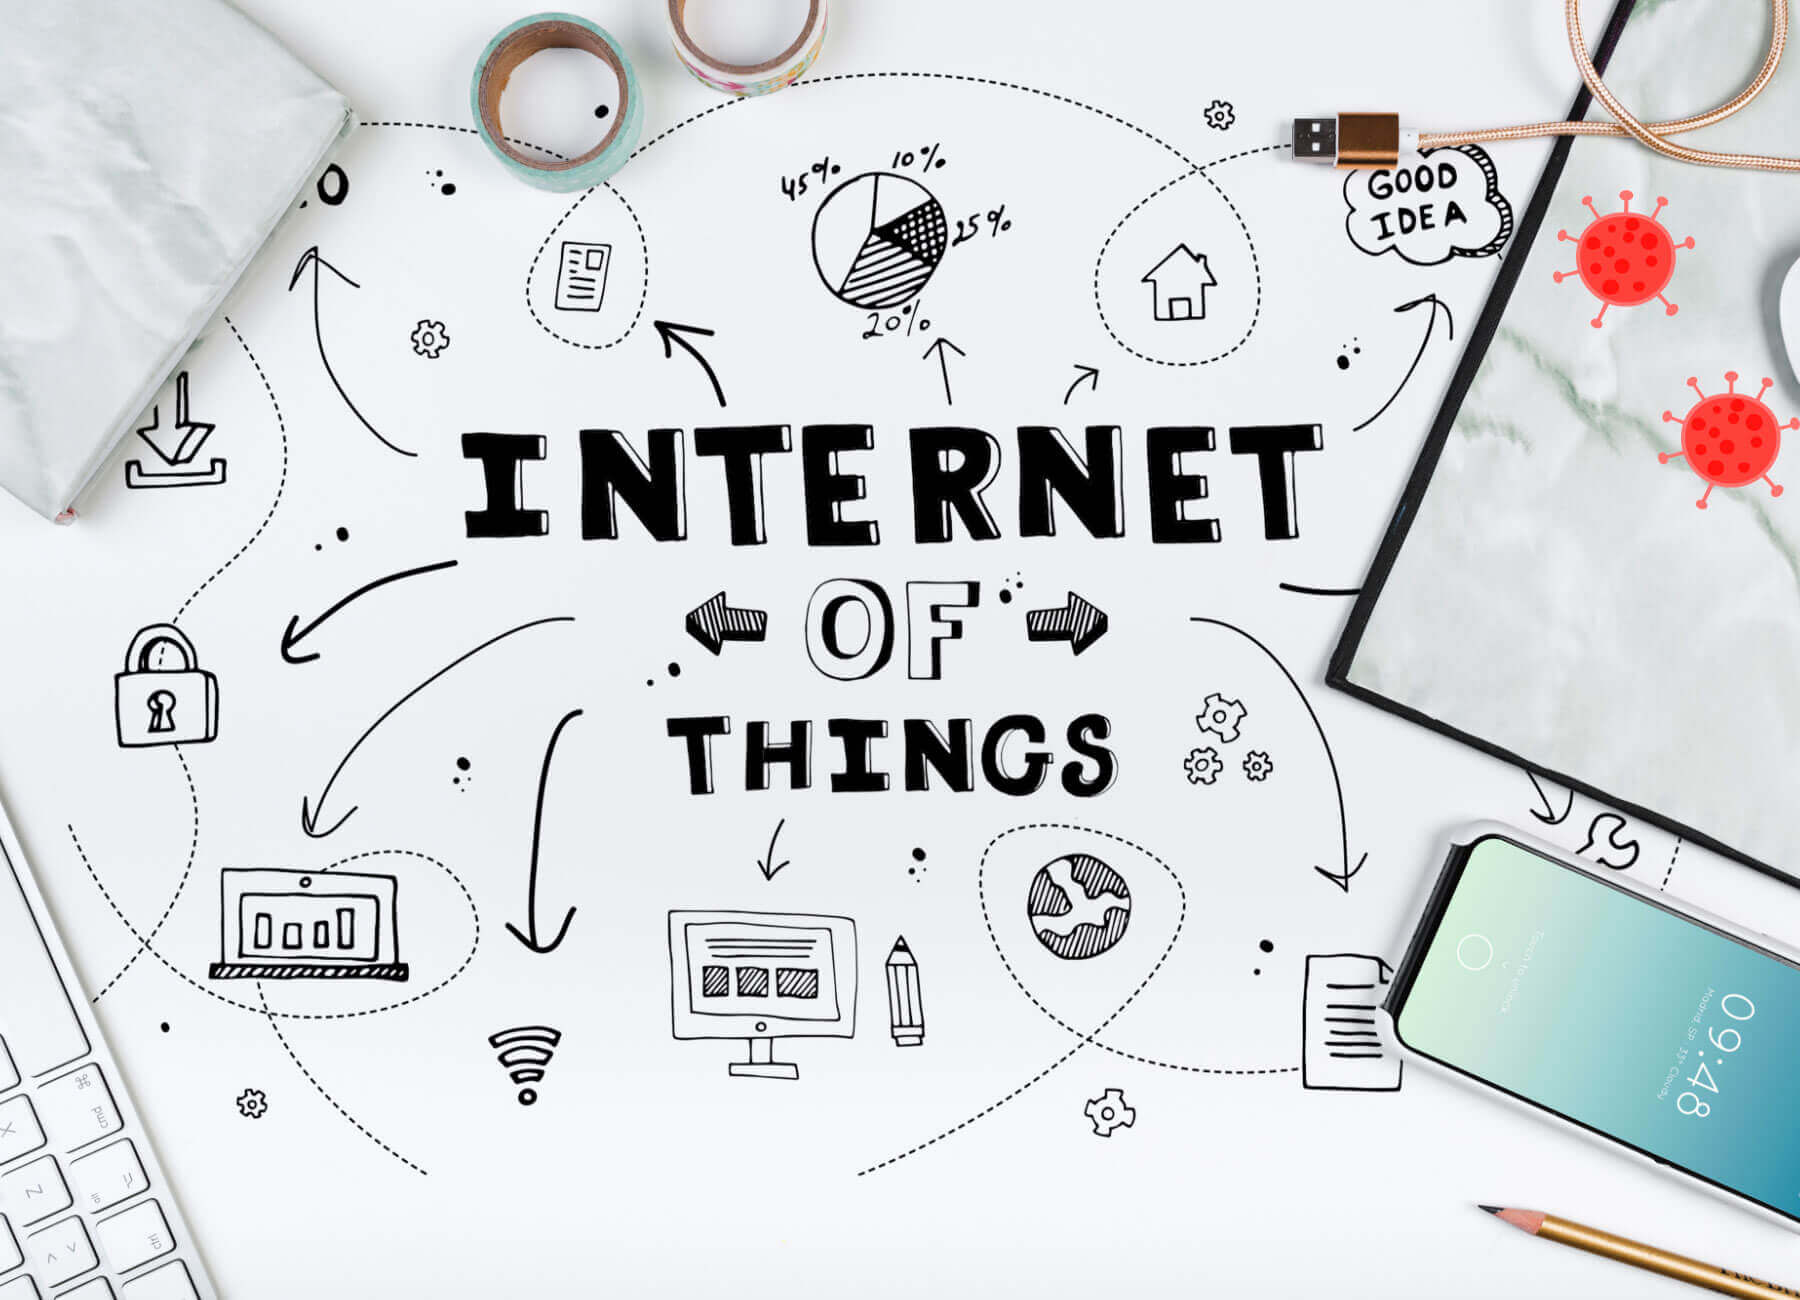 How-IoT-Became-More-Popular-During-Covid-19